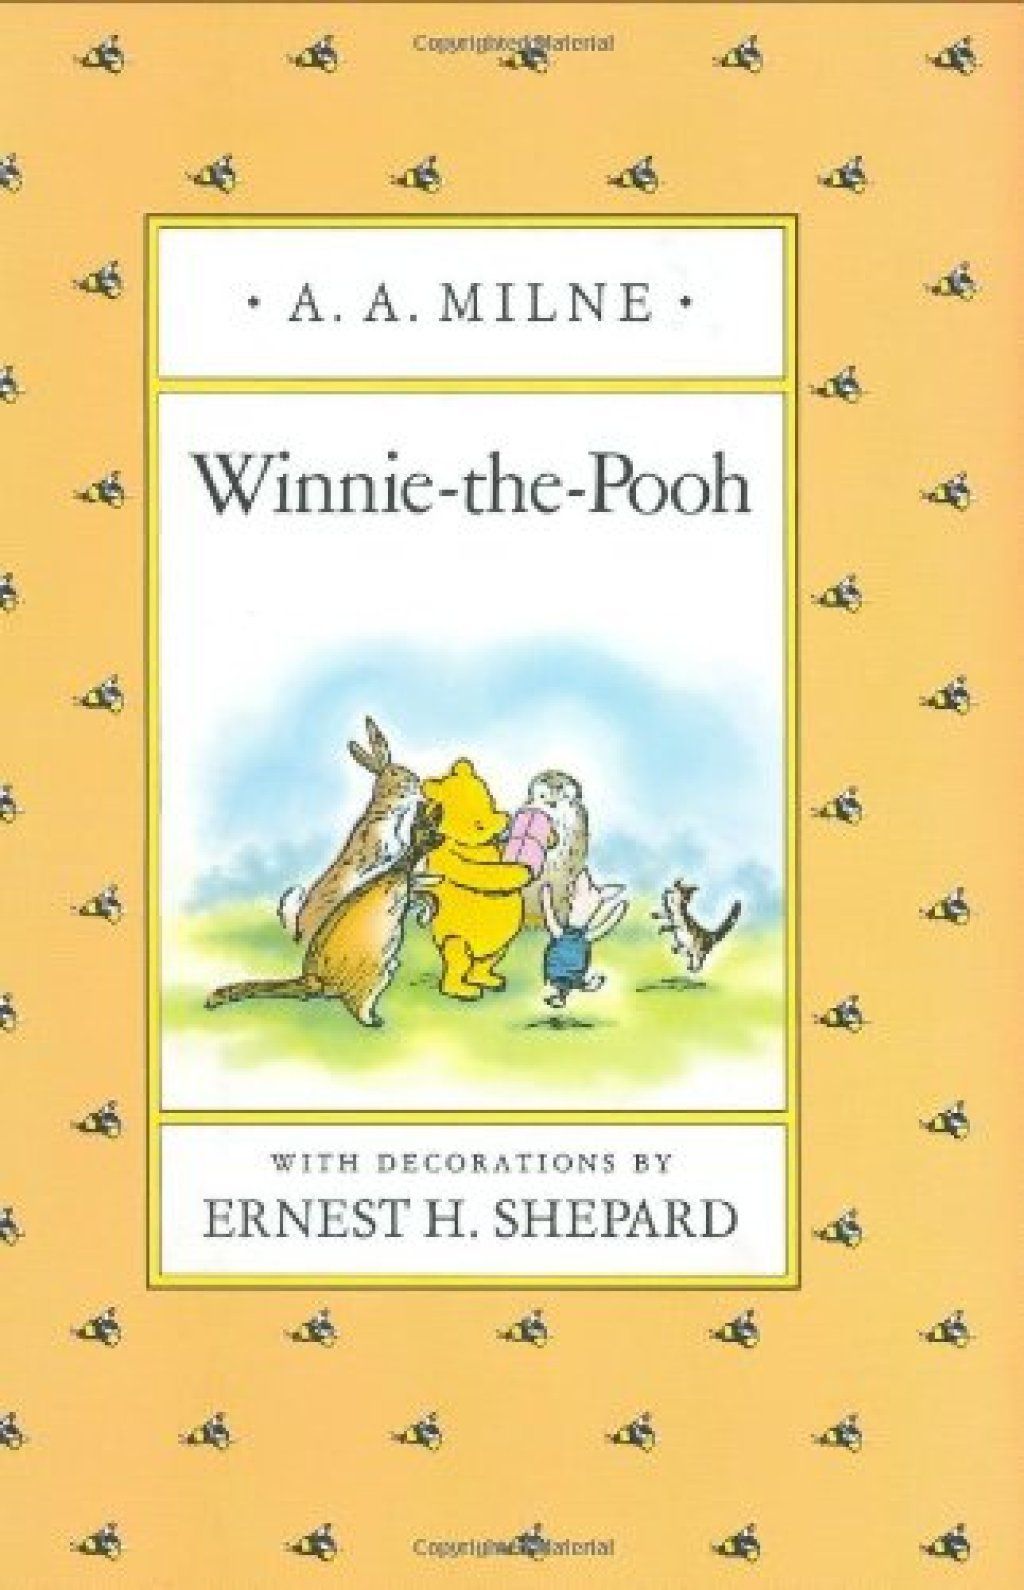 Winnie-the-Pooh A.A. Milne Jokes From Kids